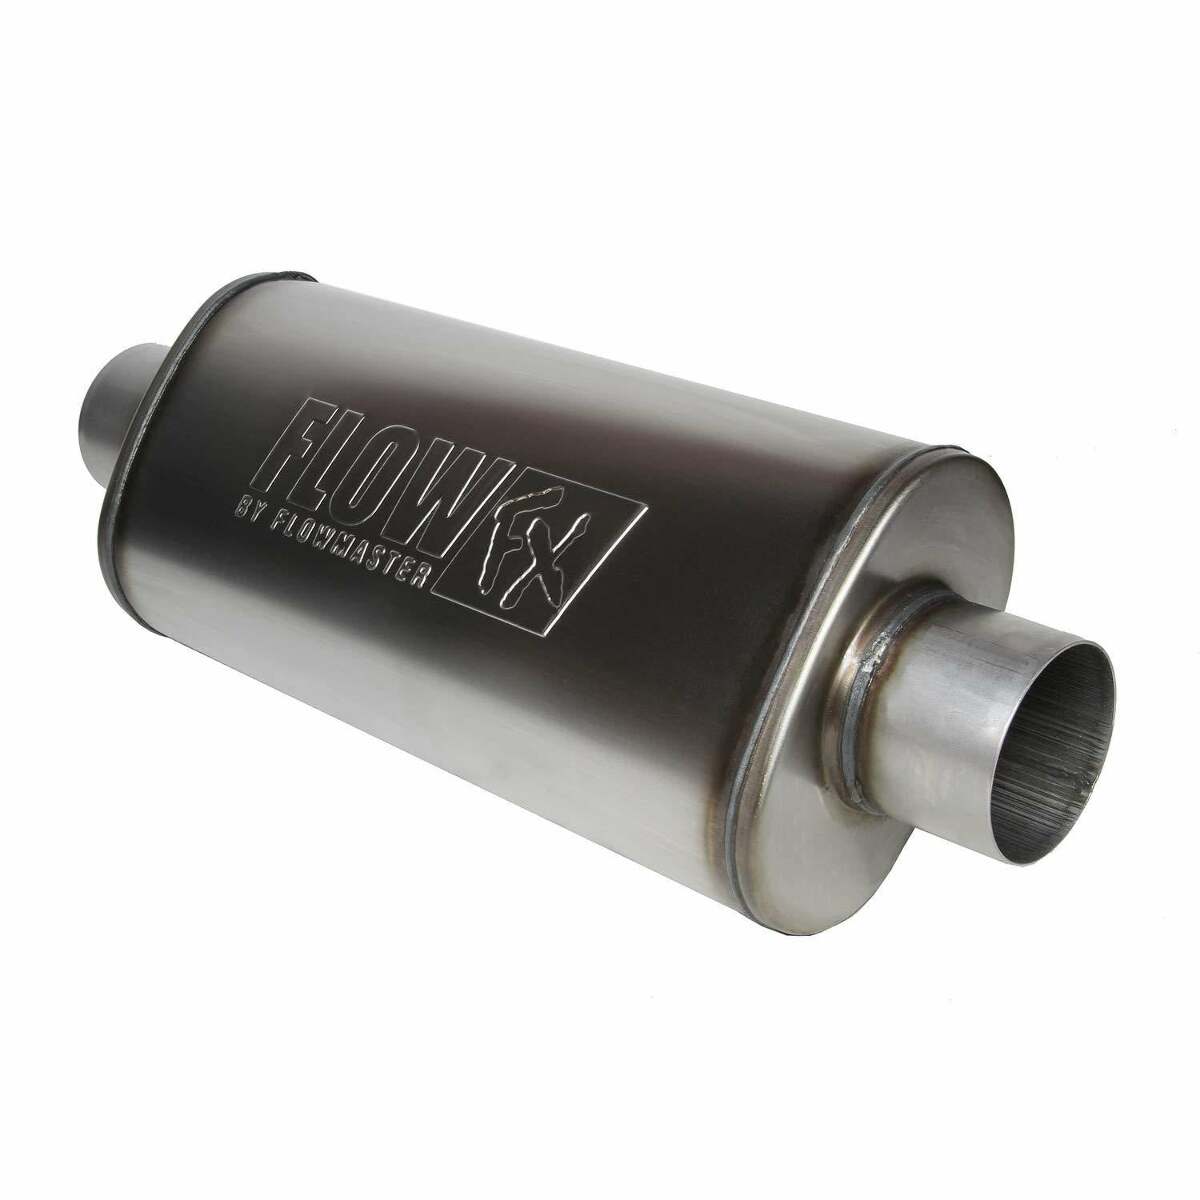 Flowmaster FlowFX Muffler 3.50 in. Center Inlet/Outlet Clamp On Stainless Steel